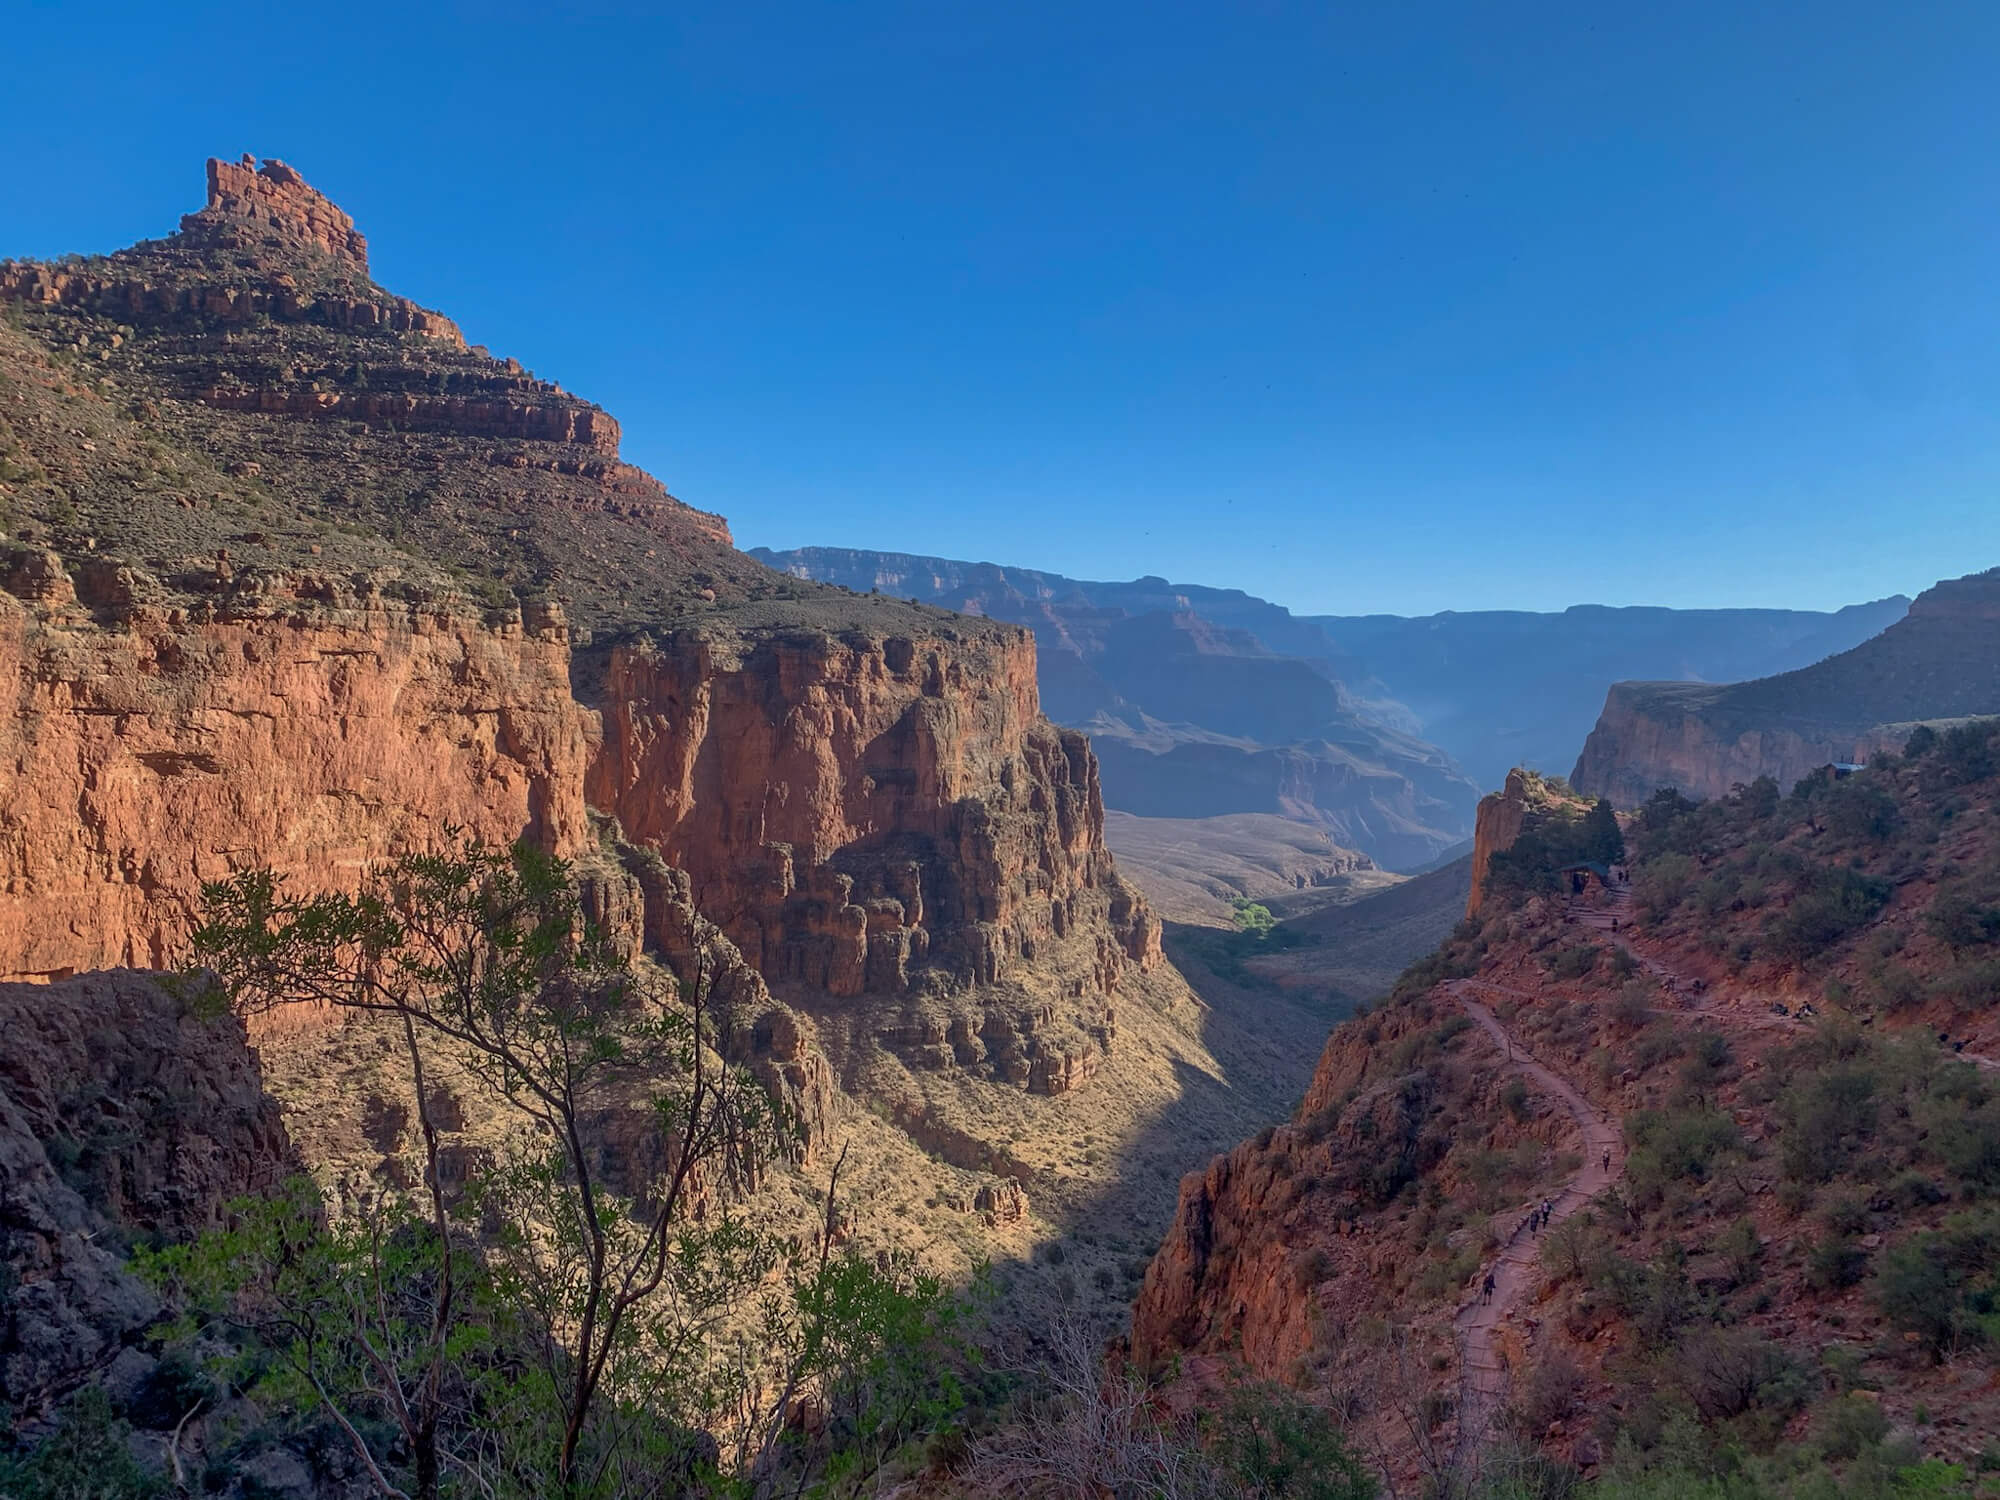 View approaching the top of Bright Angel Trail